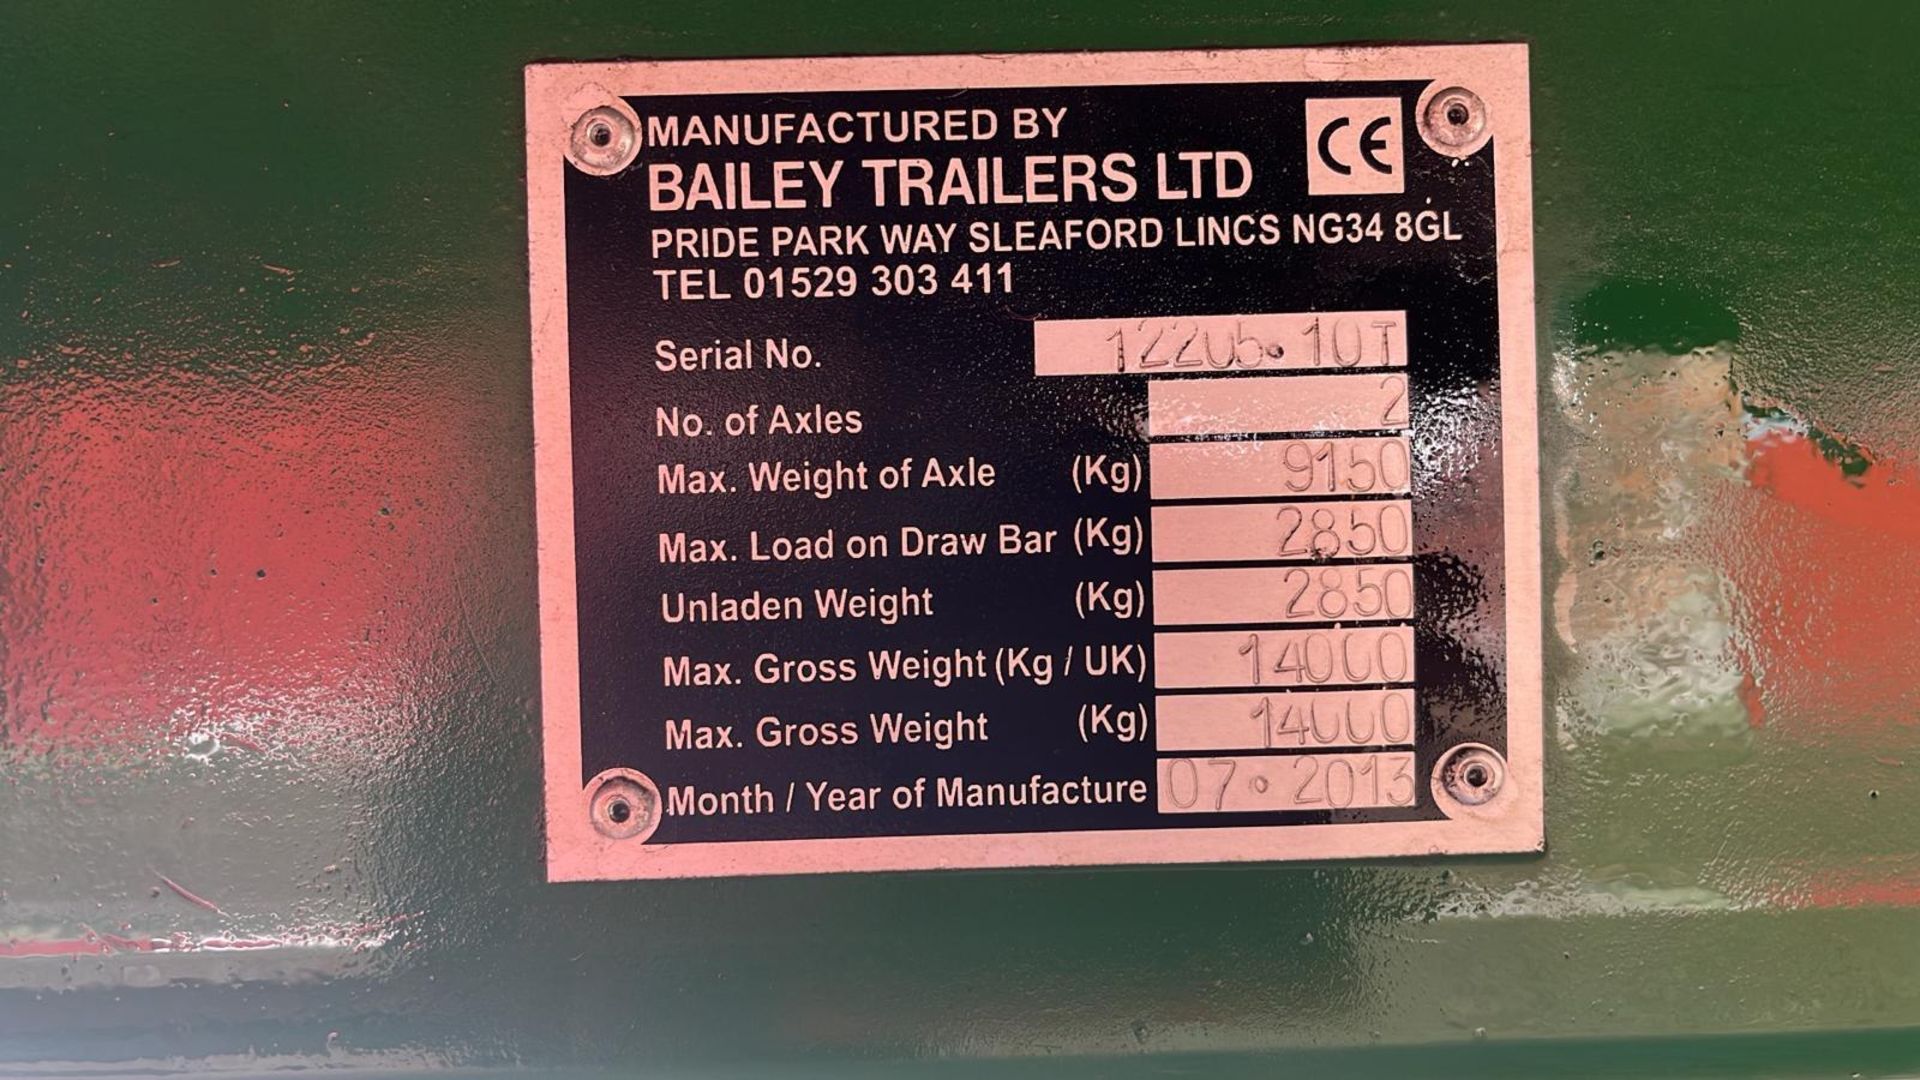 2013 BAILEYS TWIN AXLE TRAILER 26' LONG WITH RIDGED DRAW BAR SERIAL NUMBER 122U5.10T + VAT - Image 14 of 15